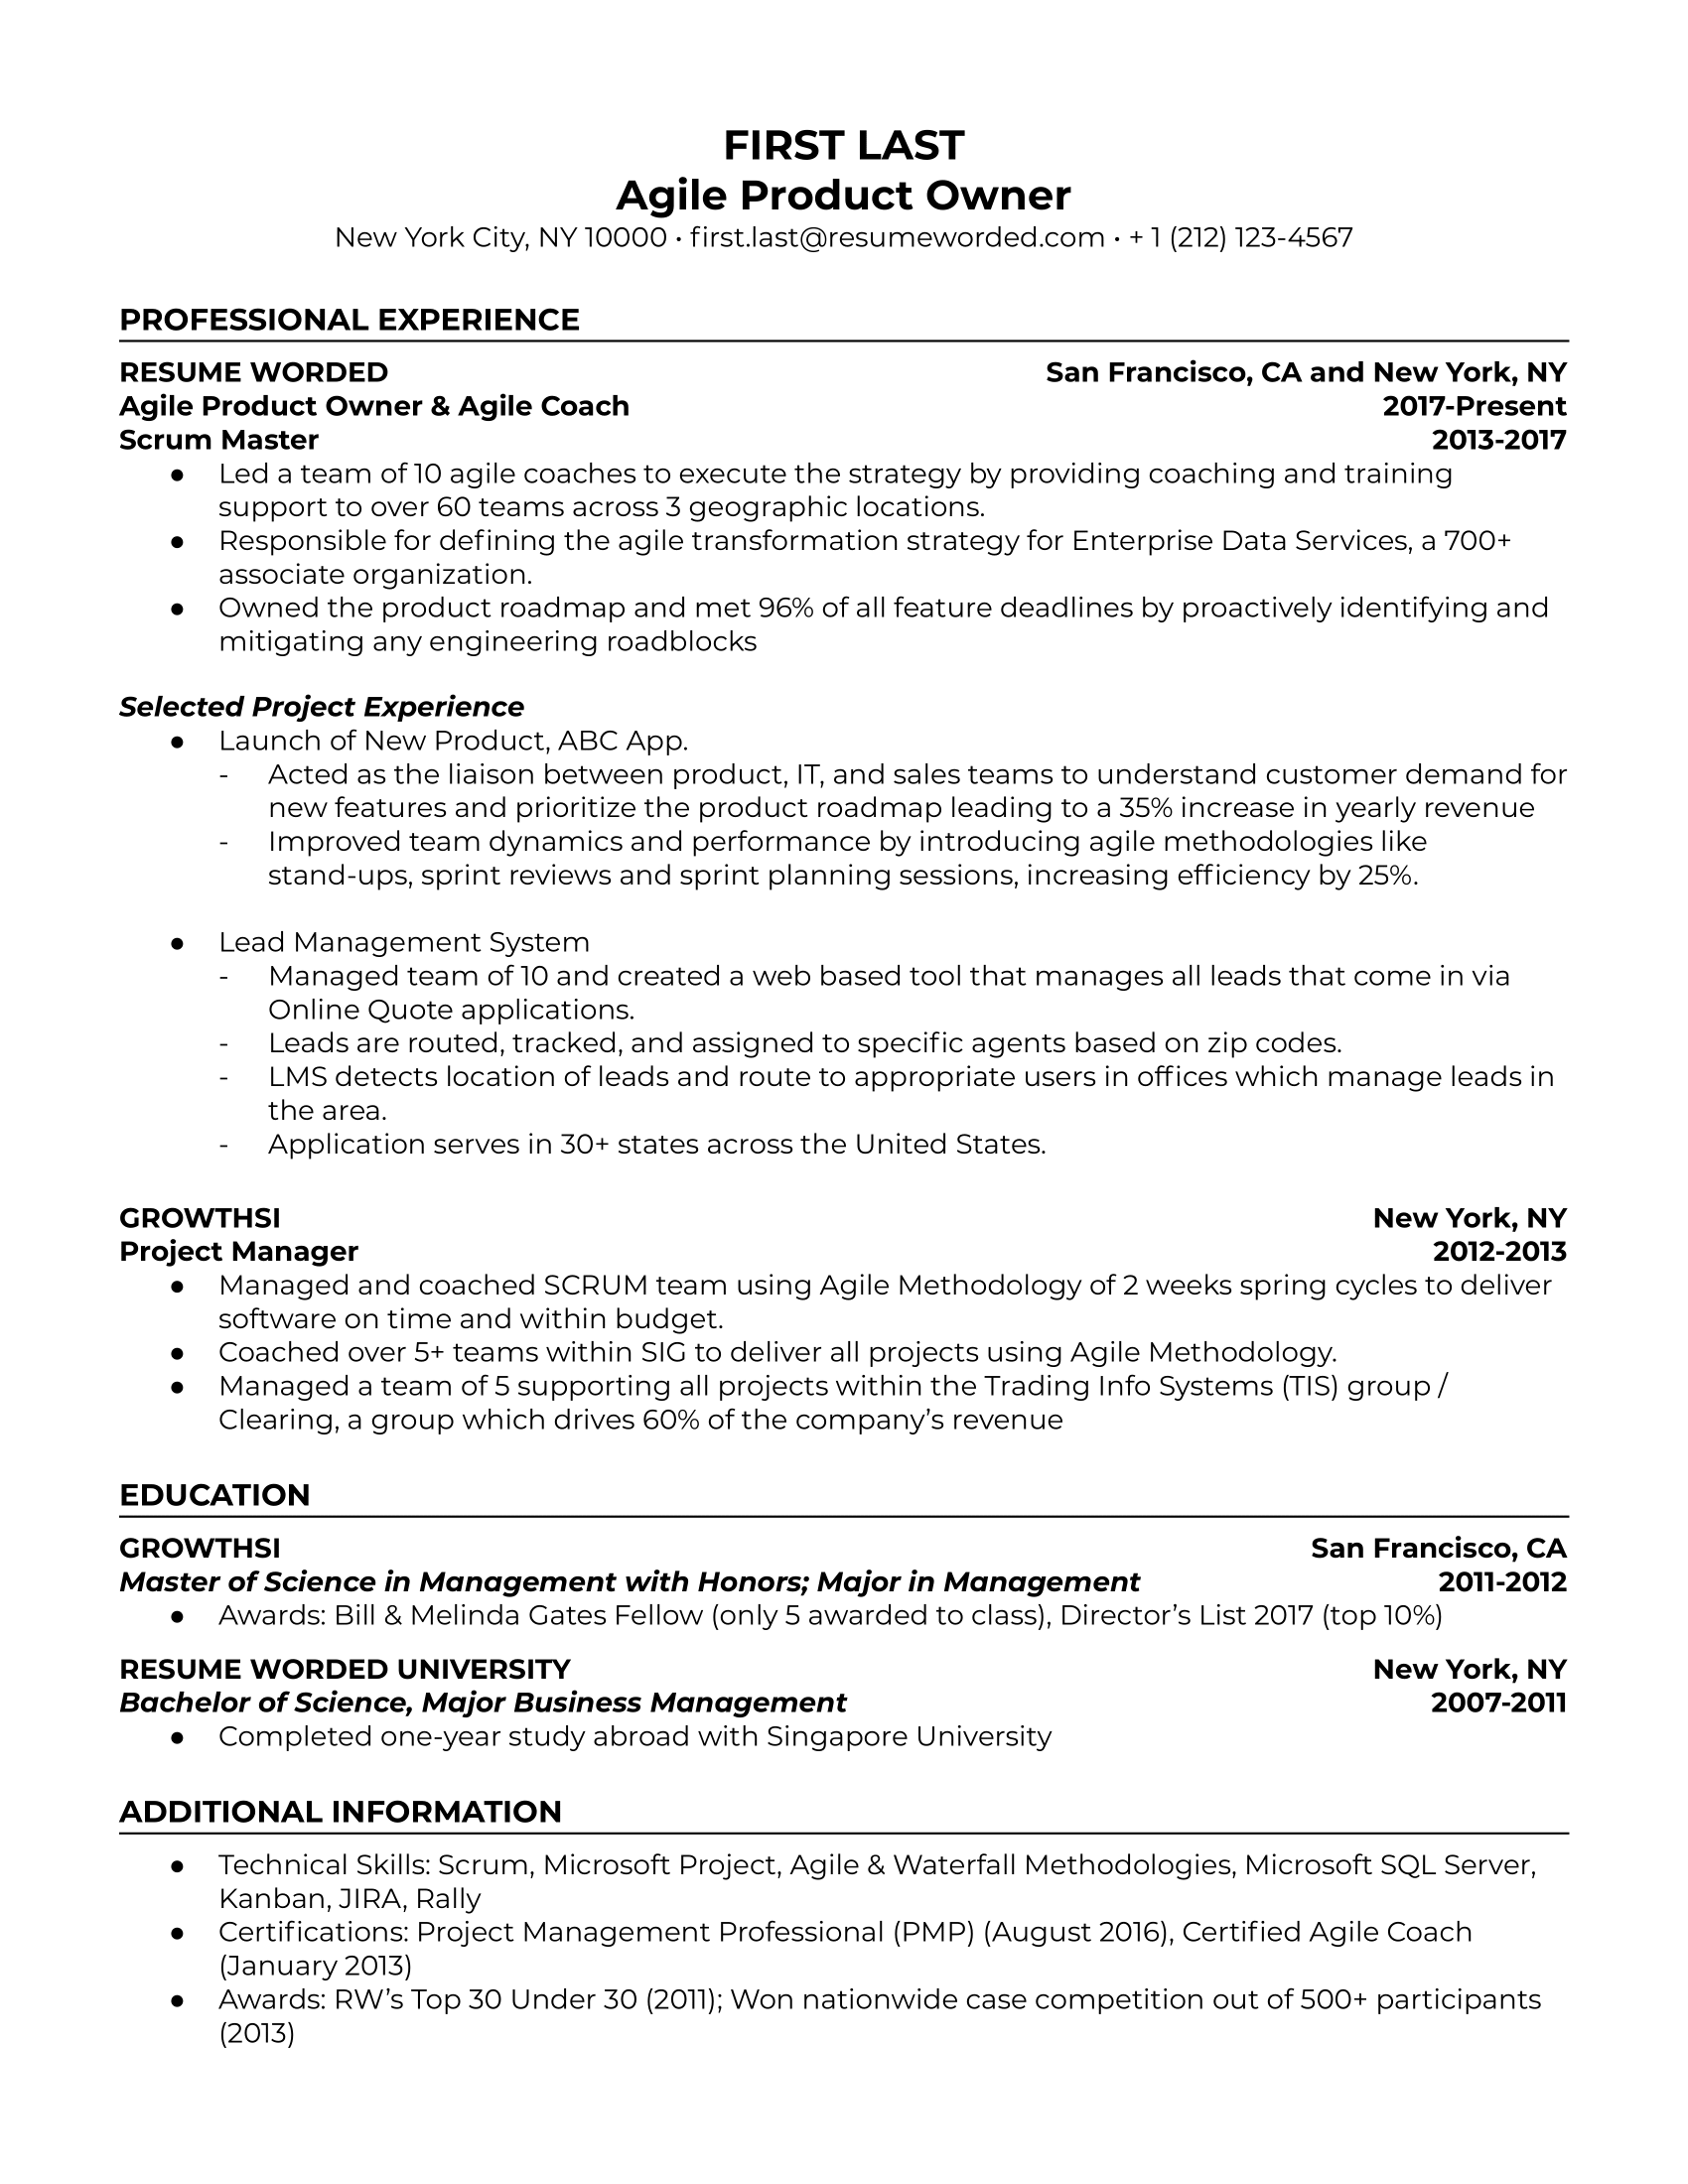 Agile Product Owner Resume Example for 2022 | Resume Worded